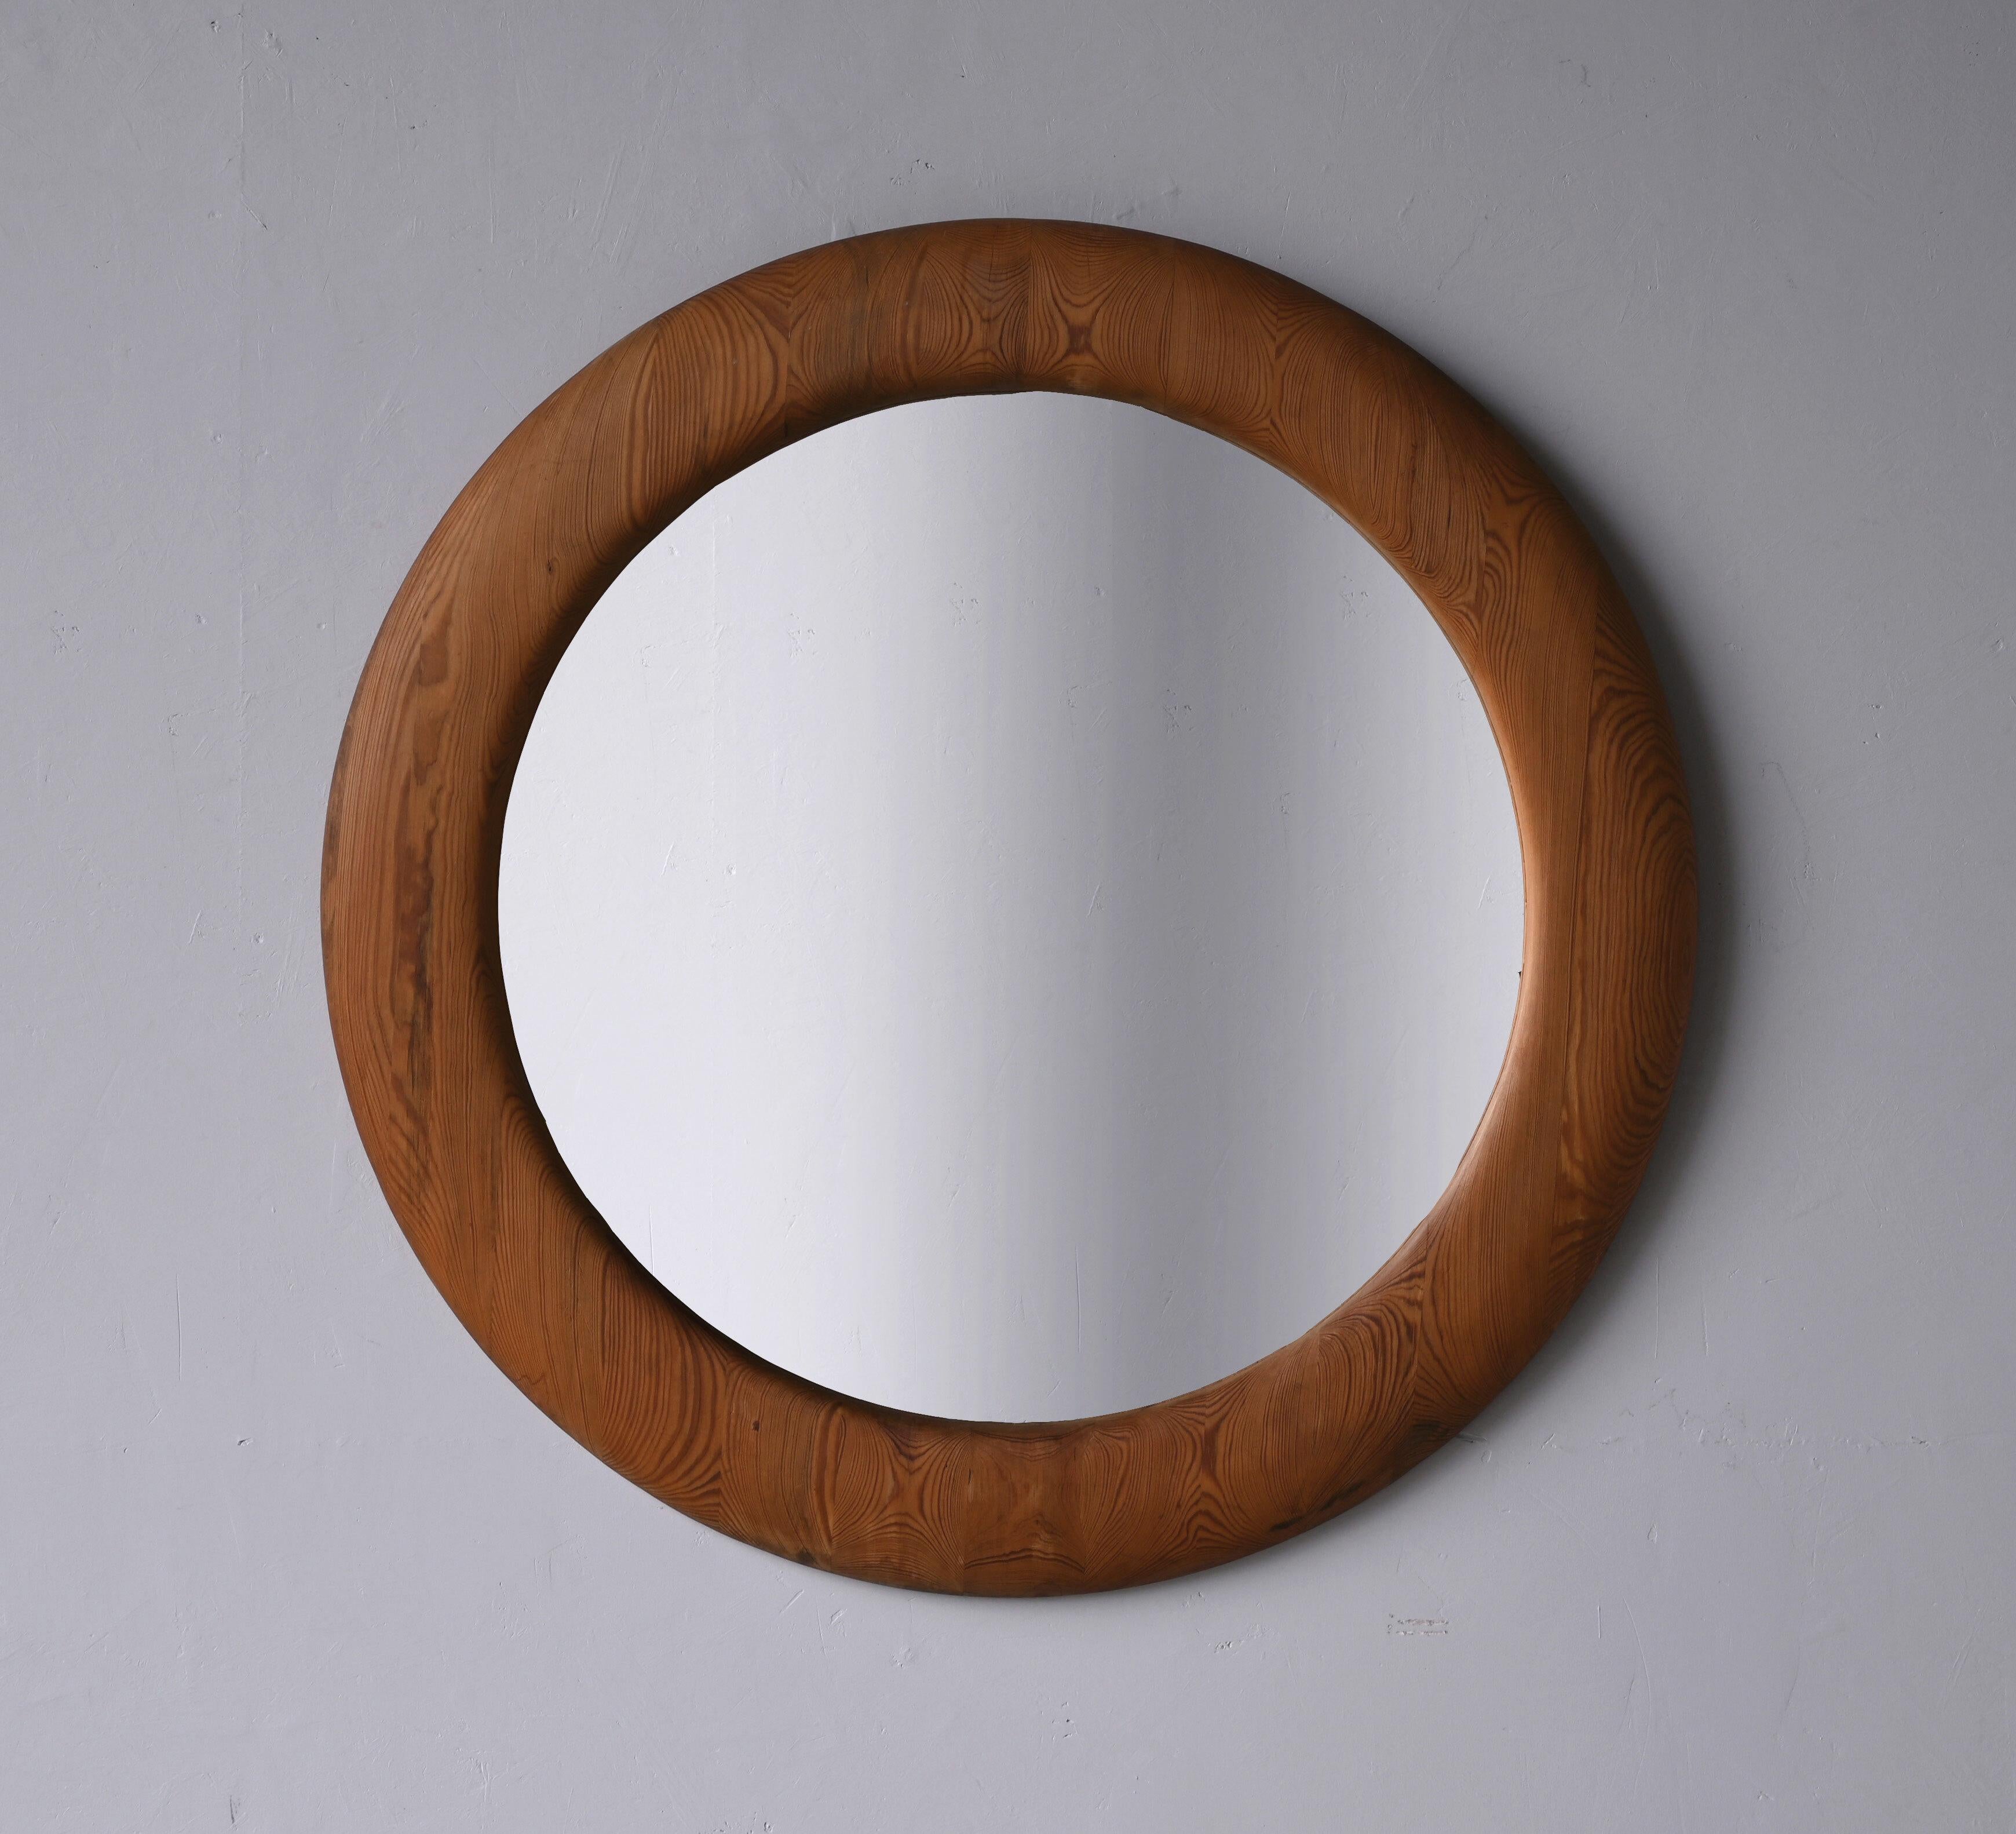 A very large wall mirror designed by Sven Larsson, manufactured by Sven Larsson Möbelshop, Sweden 1970s. Signed to the back.

Other designers working in a similar highly functional style include Axel Einar Hjorth, Roland Wilhelmsson, Pierre